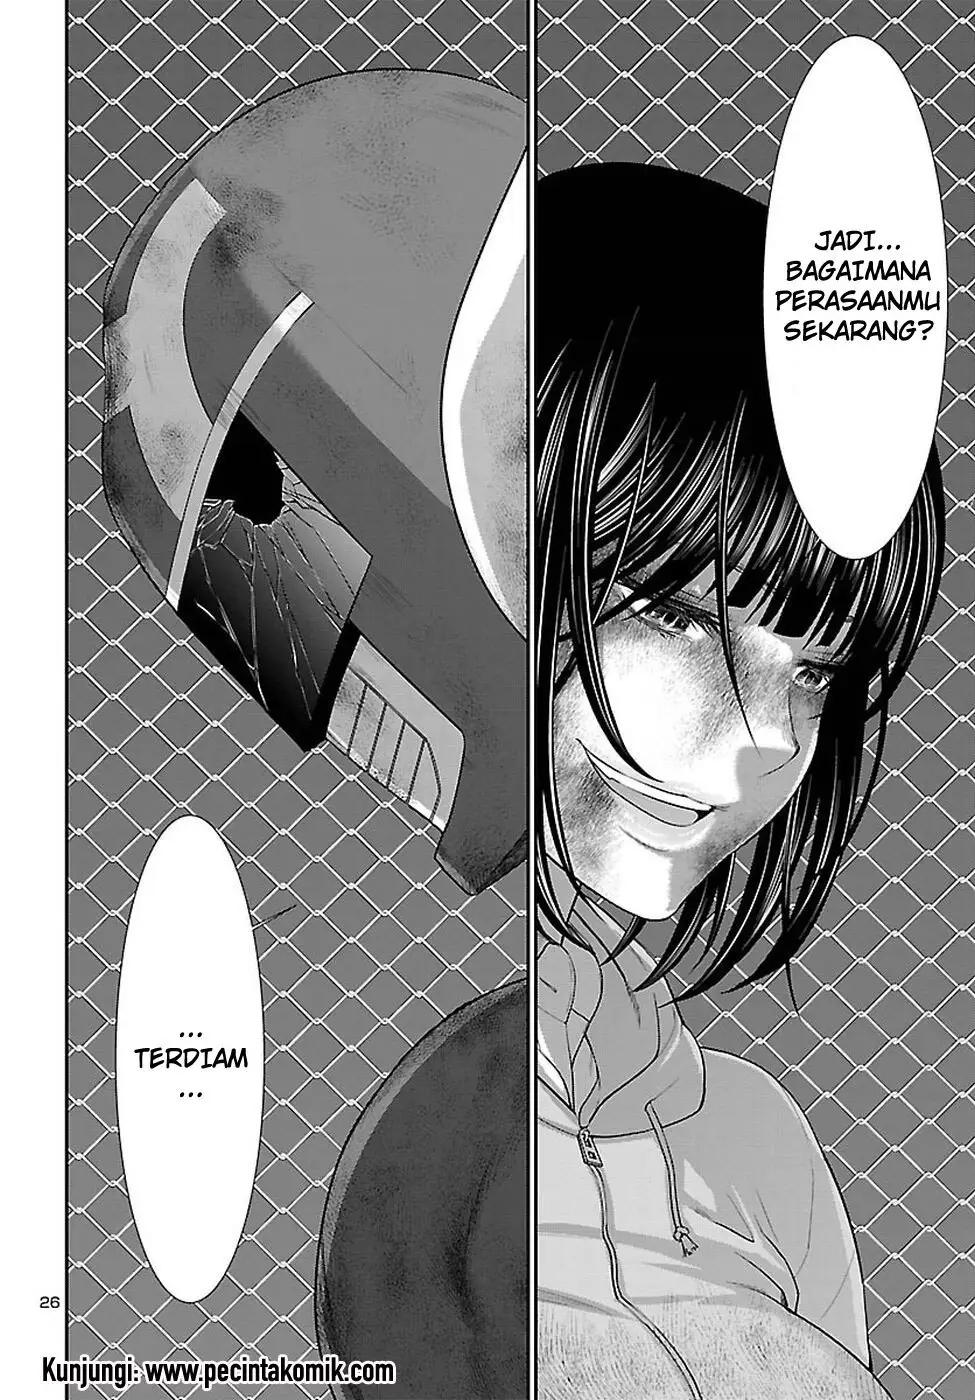 Dead Tube Chapter 42 Bahasa Indonesia